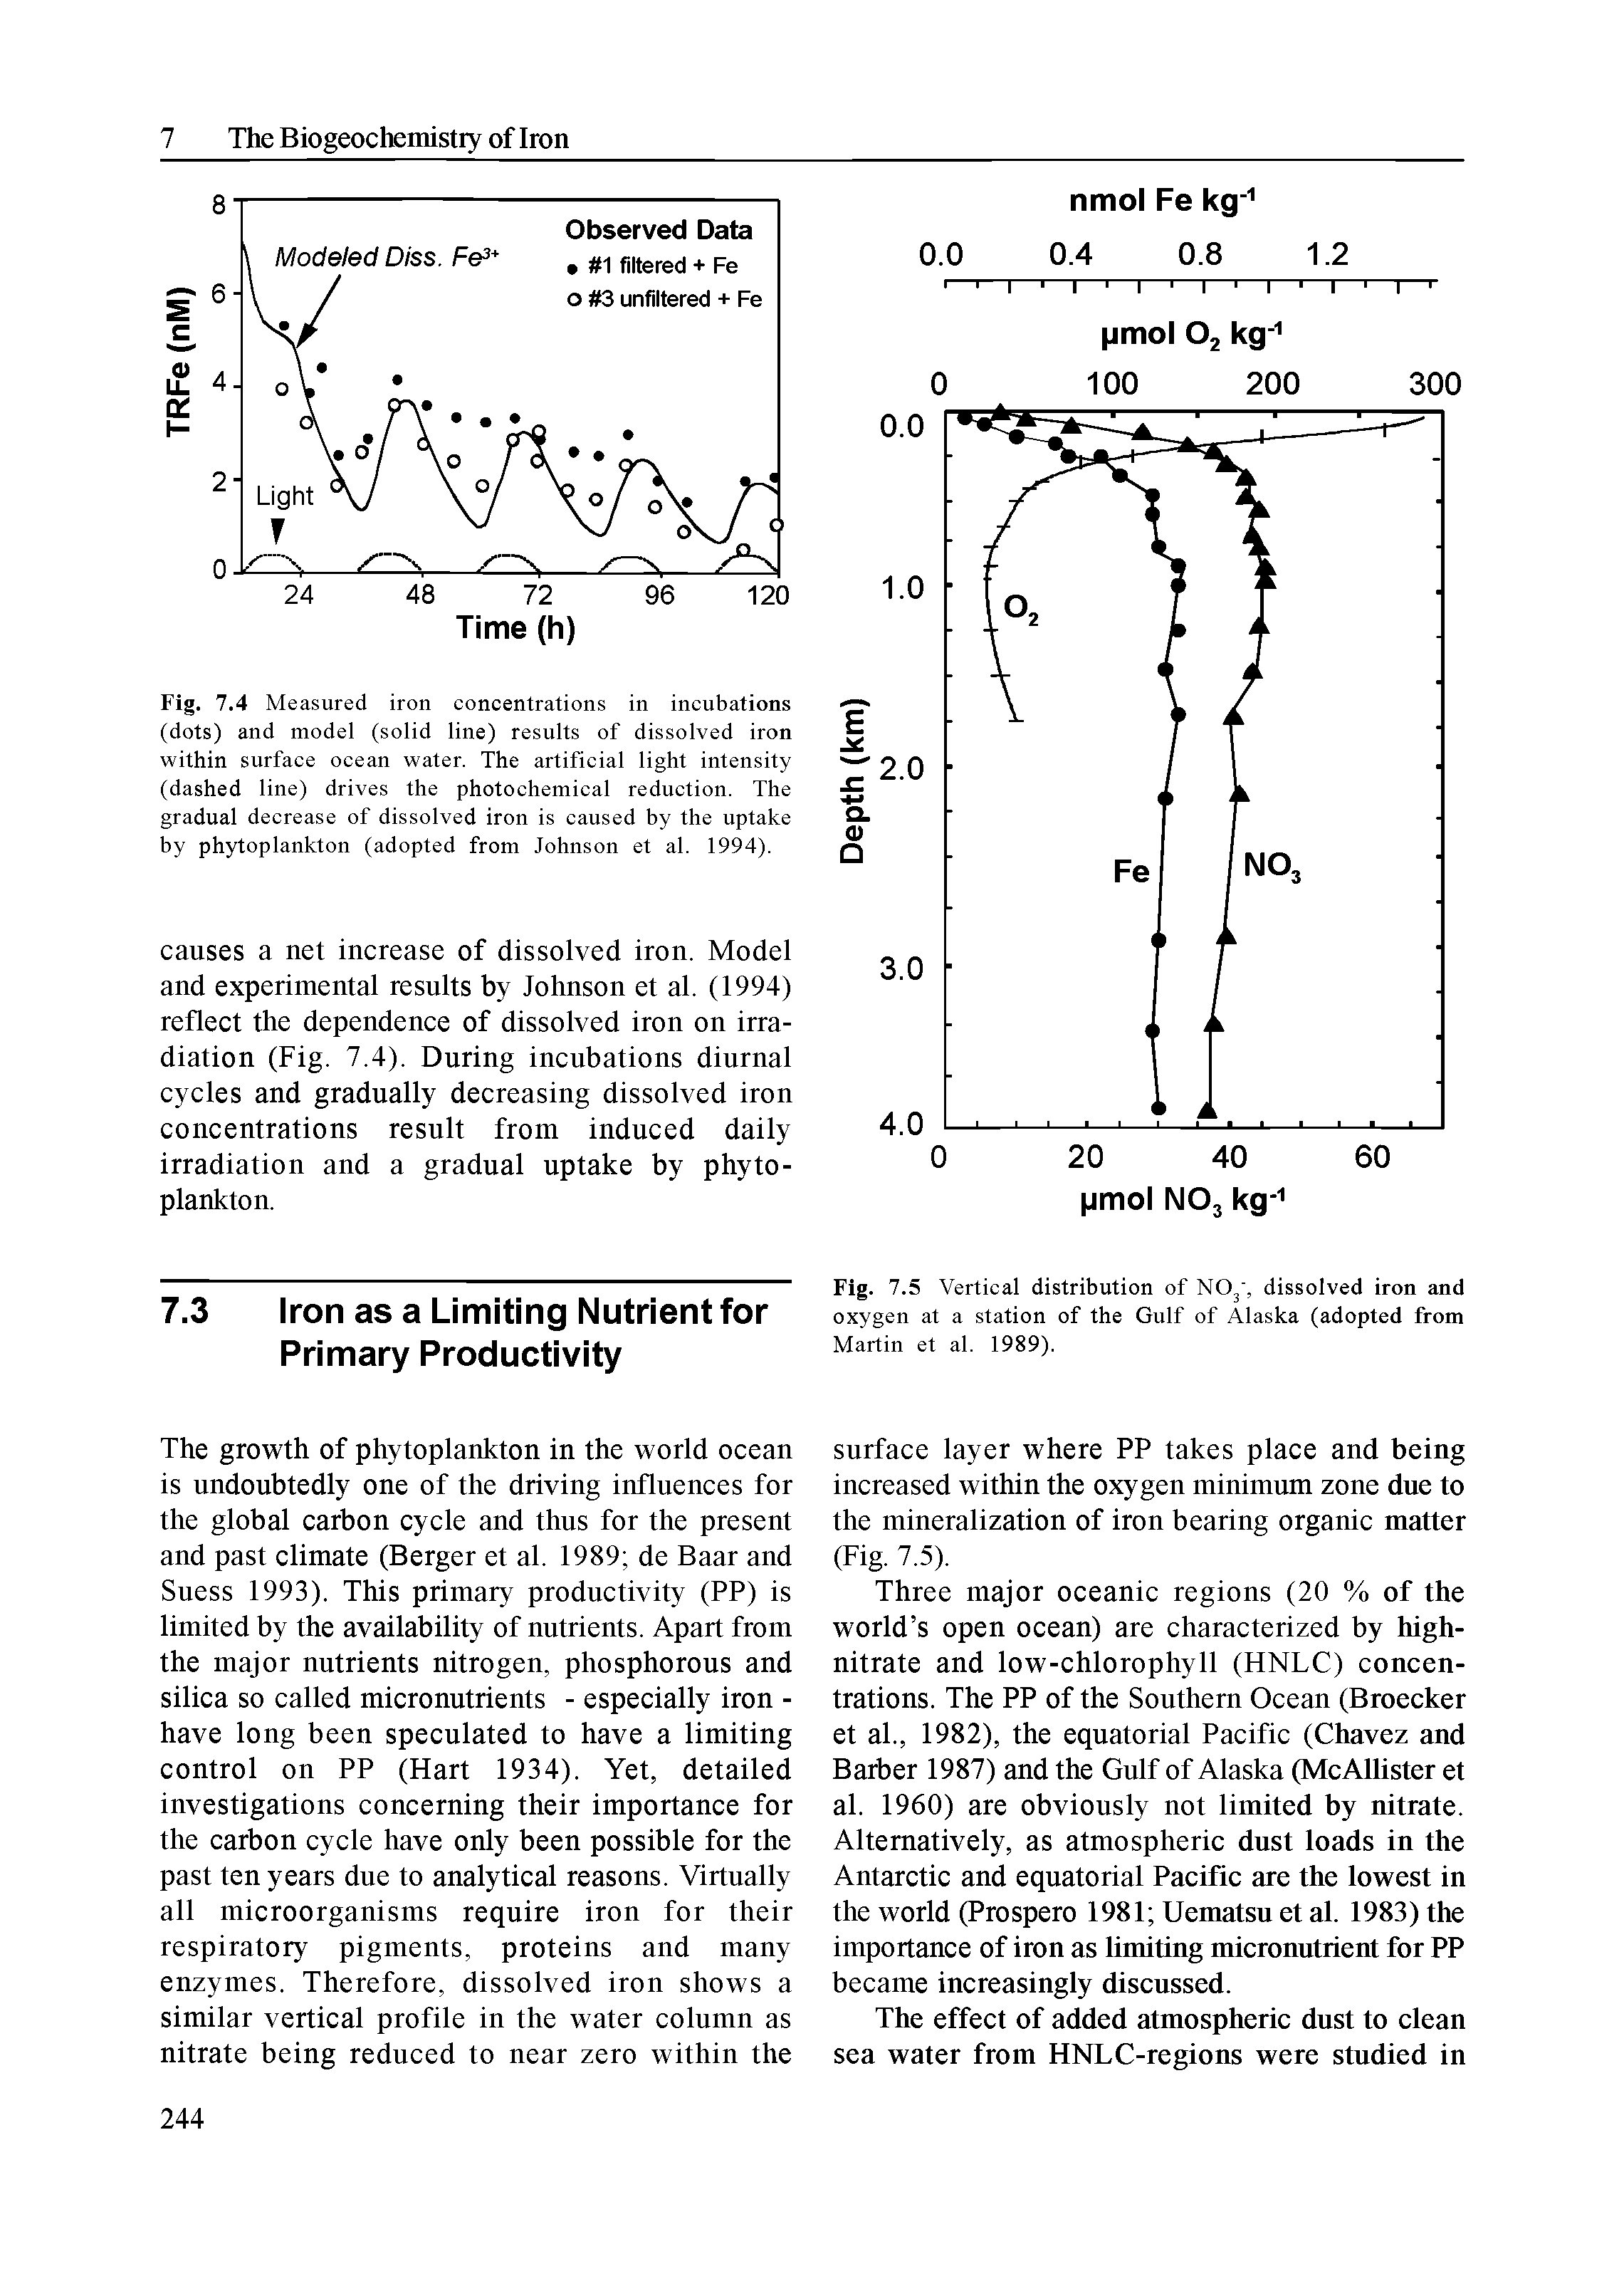 Fig. 7.4 Measured iron concentrations in incubations (dots) and model (solid line) results of dissolved iron within surface ocean water. The artificial light intensity (dashed line) drives the photochemical reduction. The gradual decrease of dissolved iron is caused by the uptake by phytoplankton (adopted from Johnson et al. 1994).